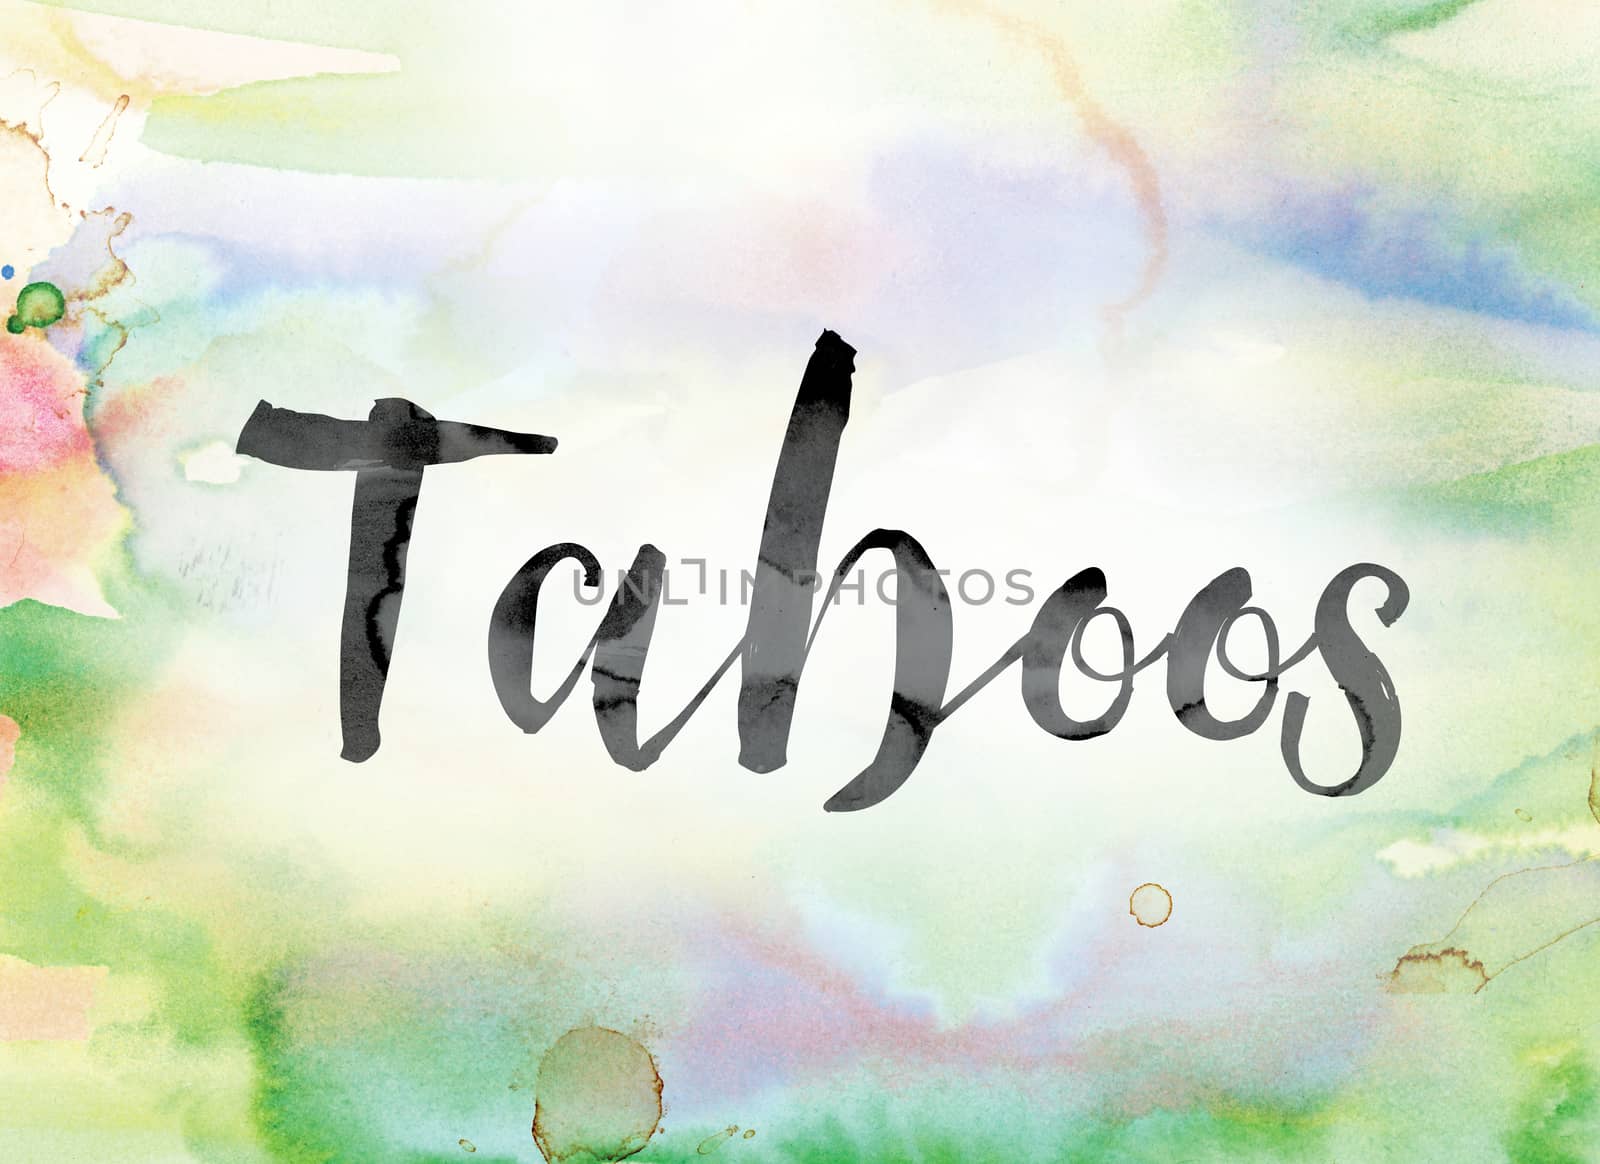 The word "Taboos" painted in black ink over a colorful watercolor washed background concept and theme.